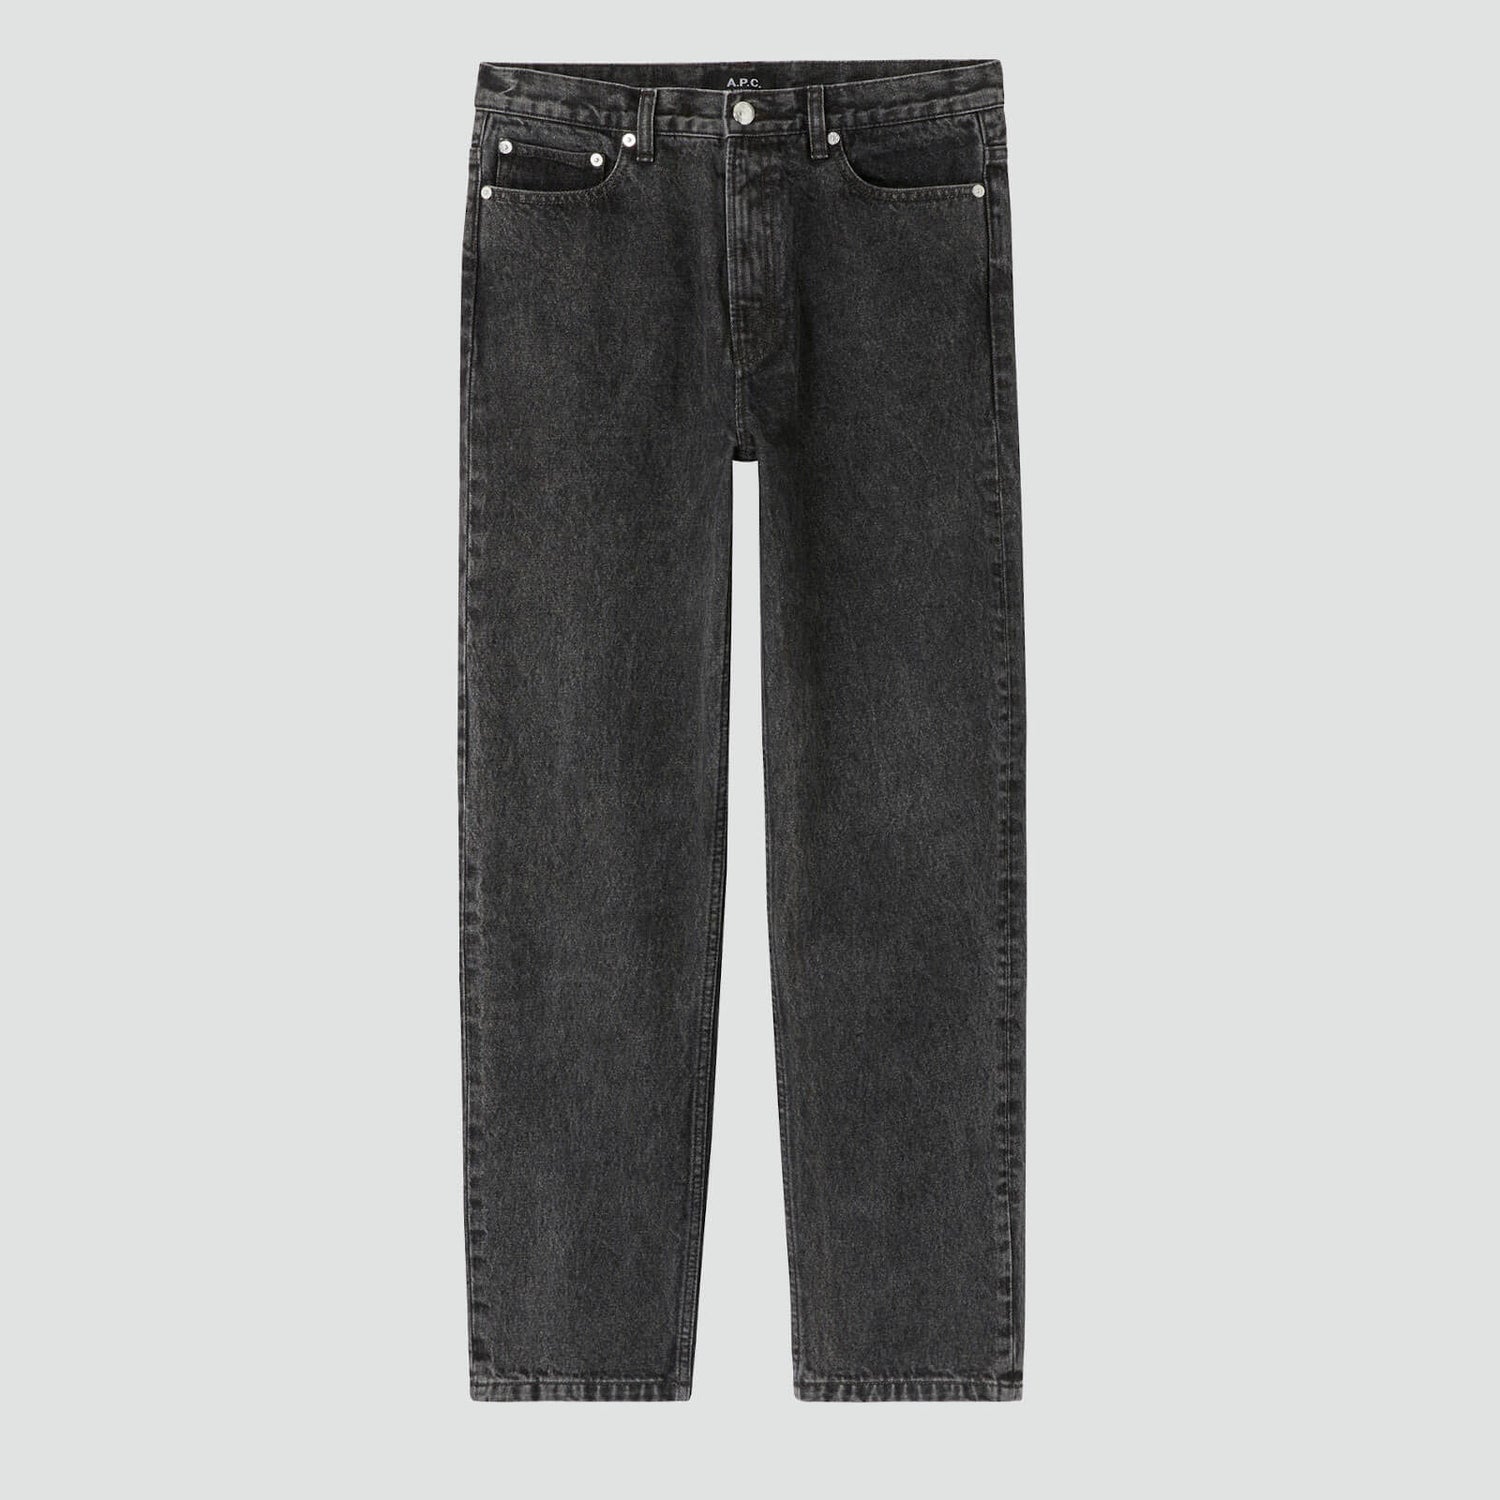 A.P.C. Men's Martin Denim Jeans - Grey - Free UK Delivery Available